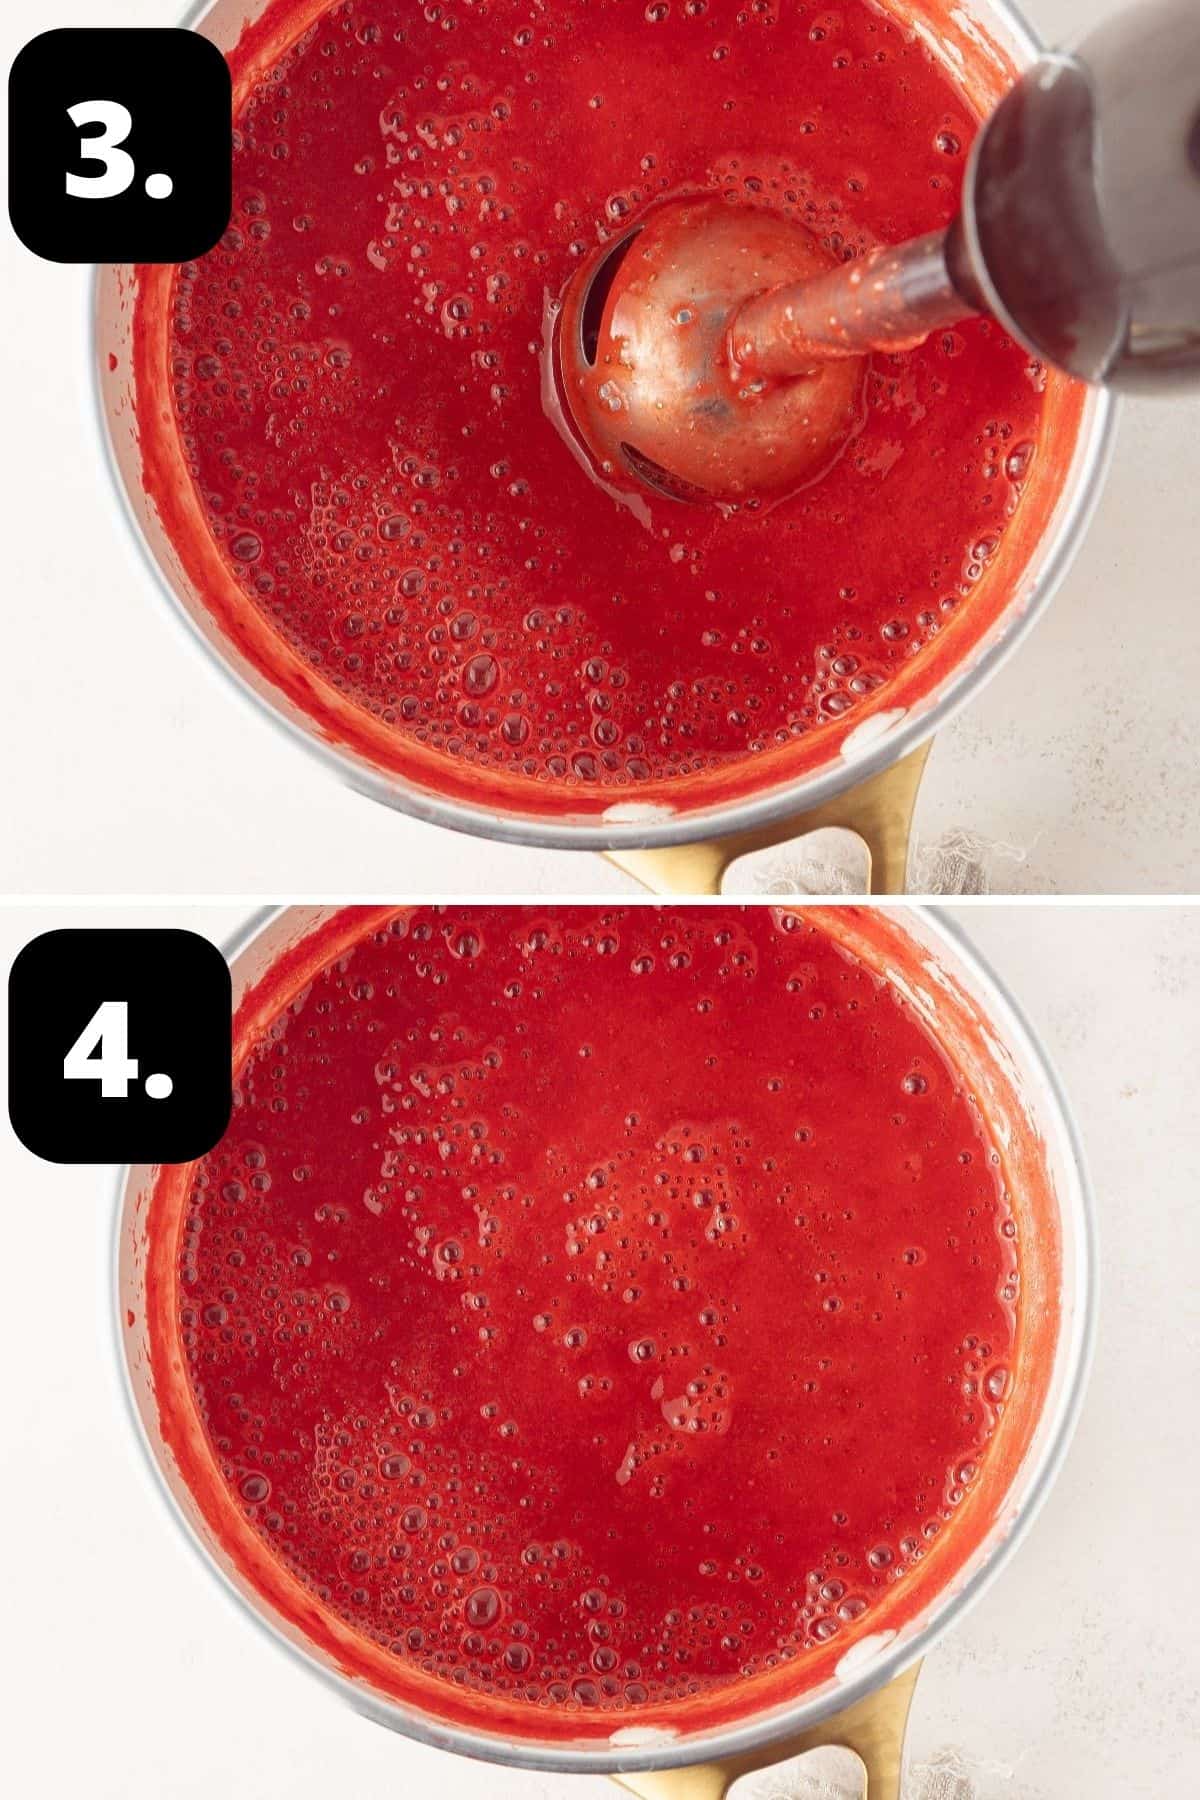 Steps 3-4 of preparing this recipe: blending the sauce using an immersion blender and the finished sauce.